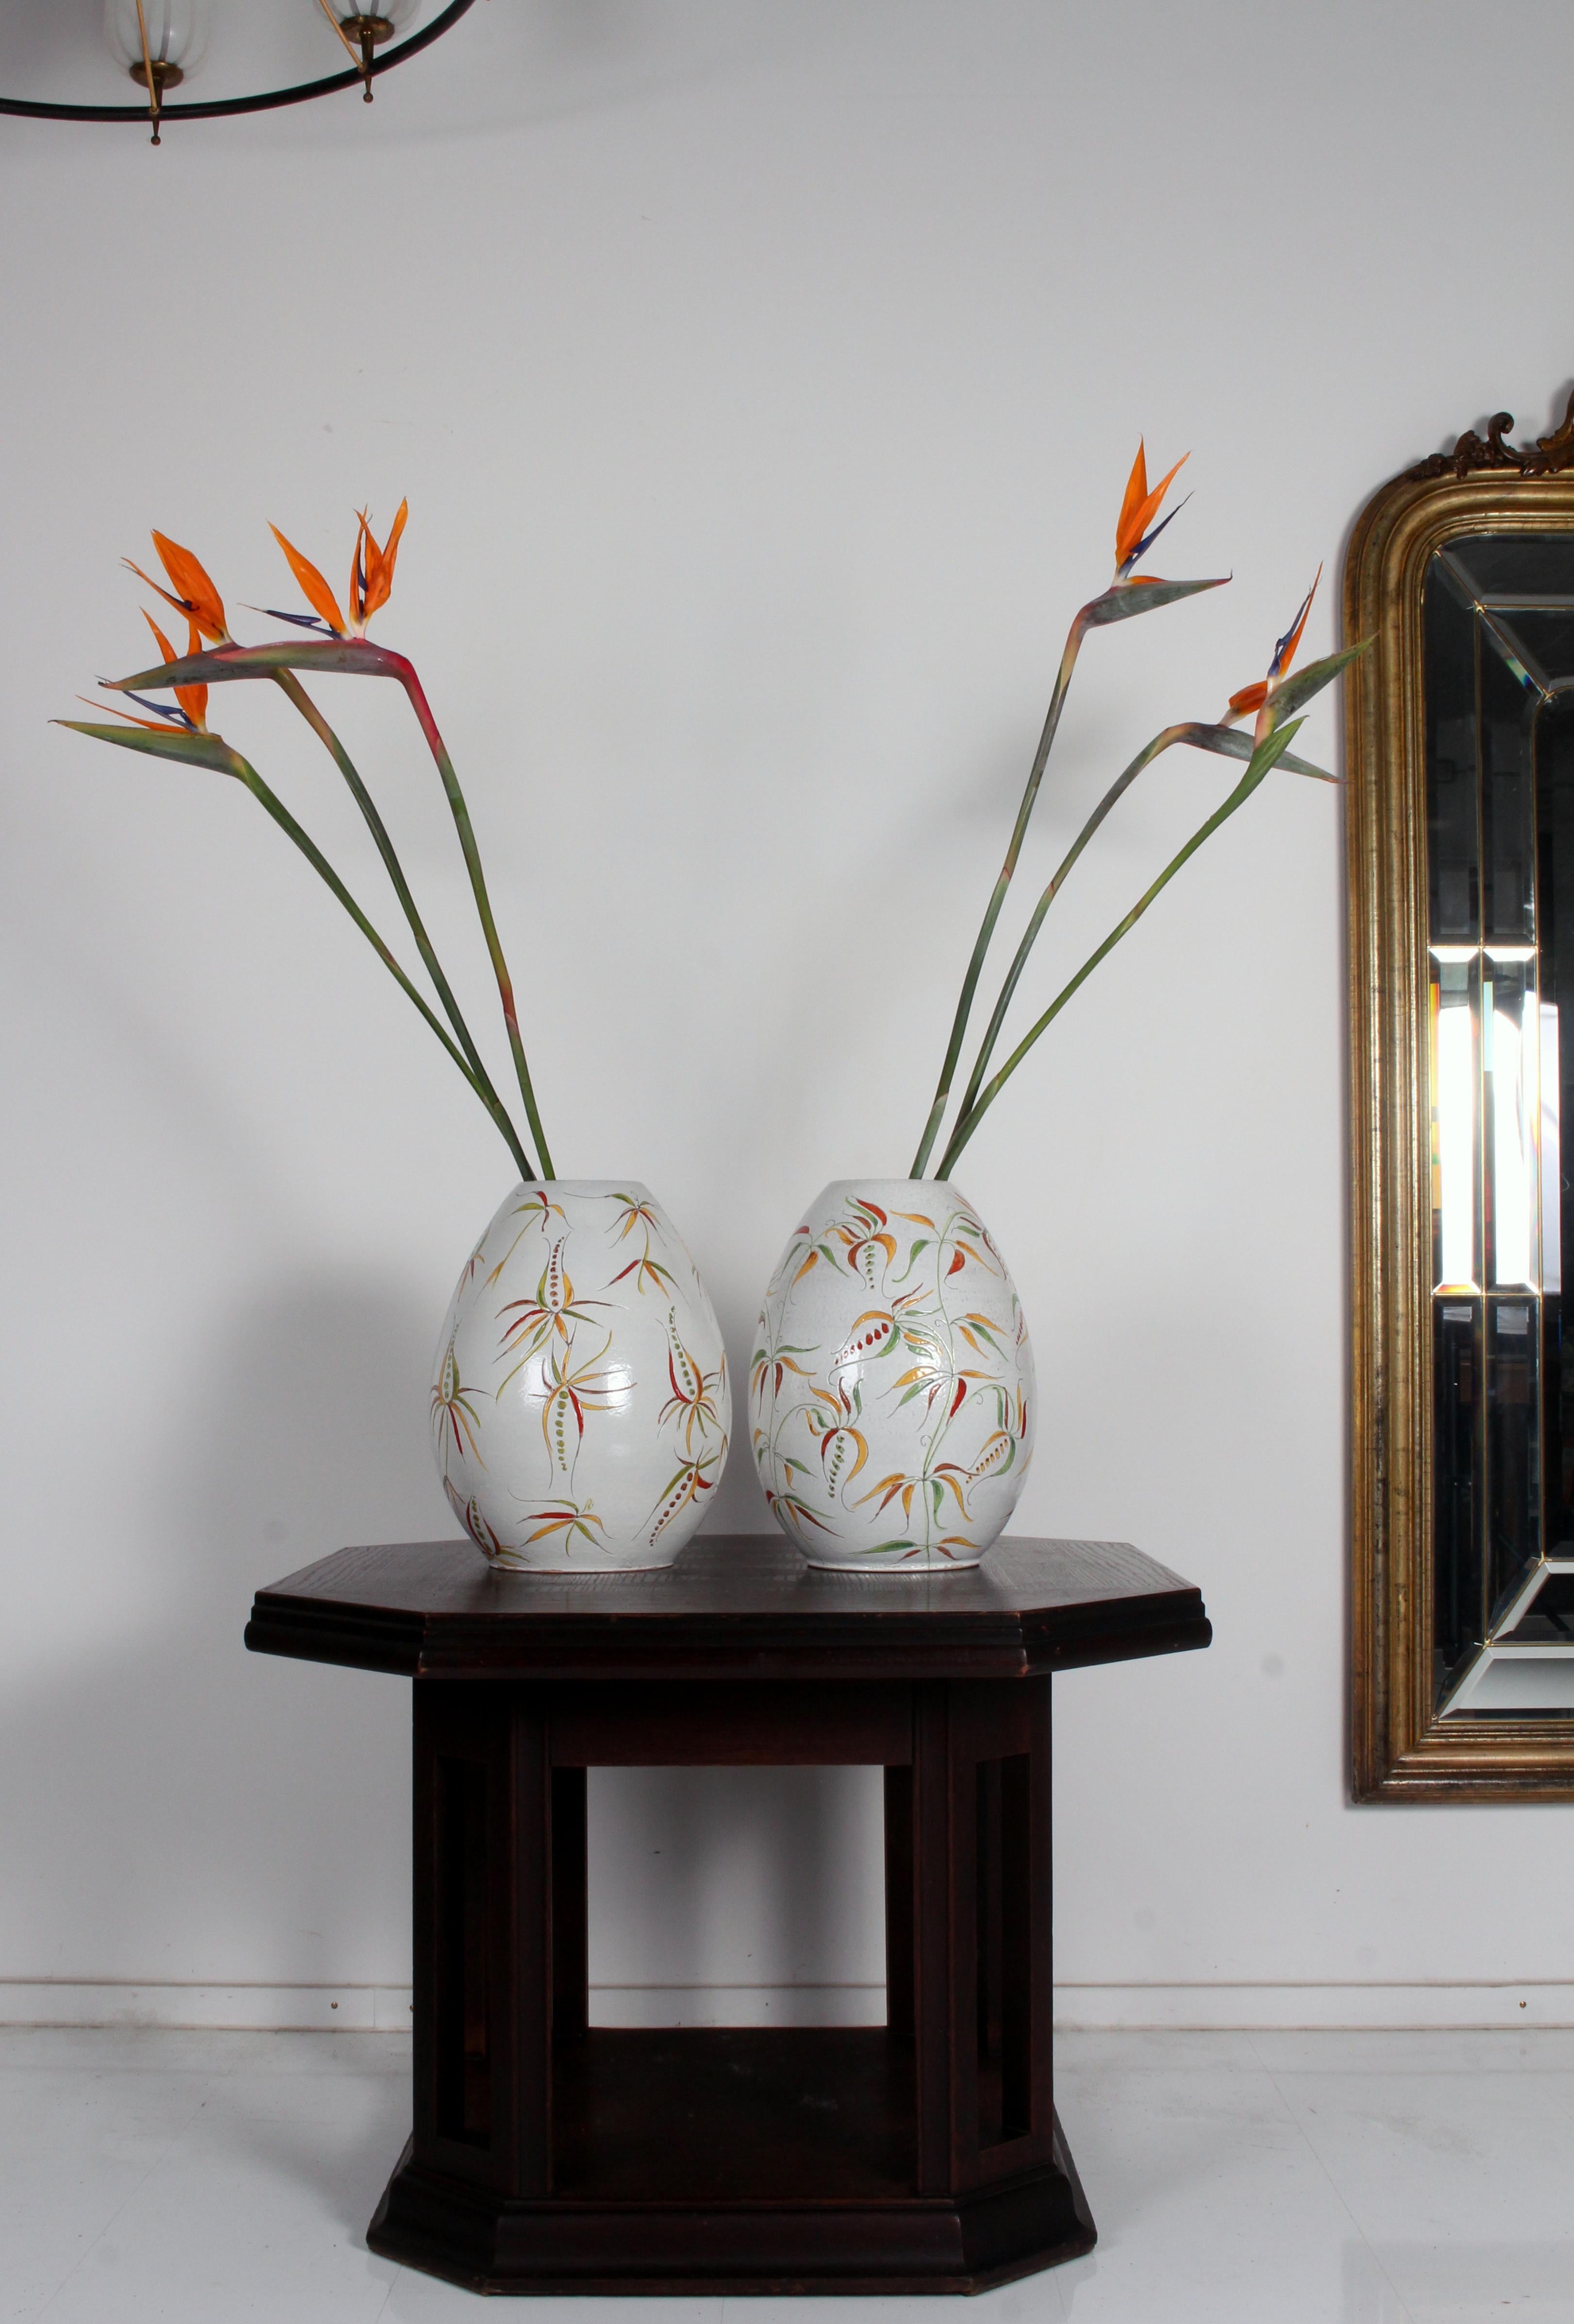 an amazing set of 2 STUDIO KERAMIK FLOOR VASES 
by Atelier Herta Huber Roethe Landshut 1950s 
Manufacturer 	HUBER ROETHE
Design Period 	1950 to 1959
Production Period 	1950 to 1959
Country of Manufacture 	Germany
 H / height: 40 cm ~  Gew. / weight: